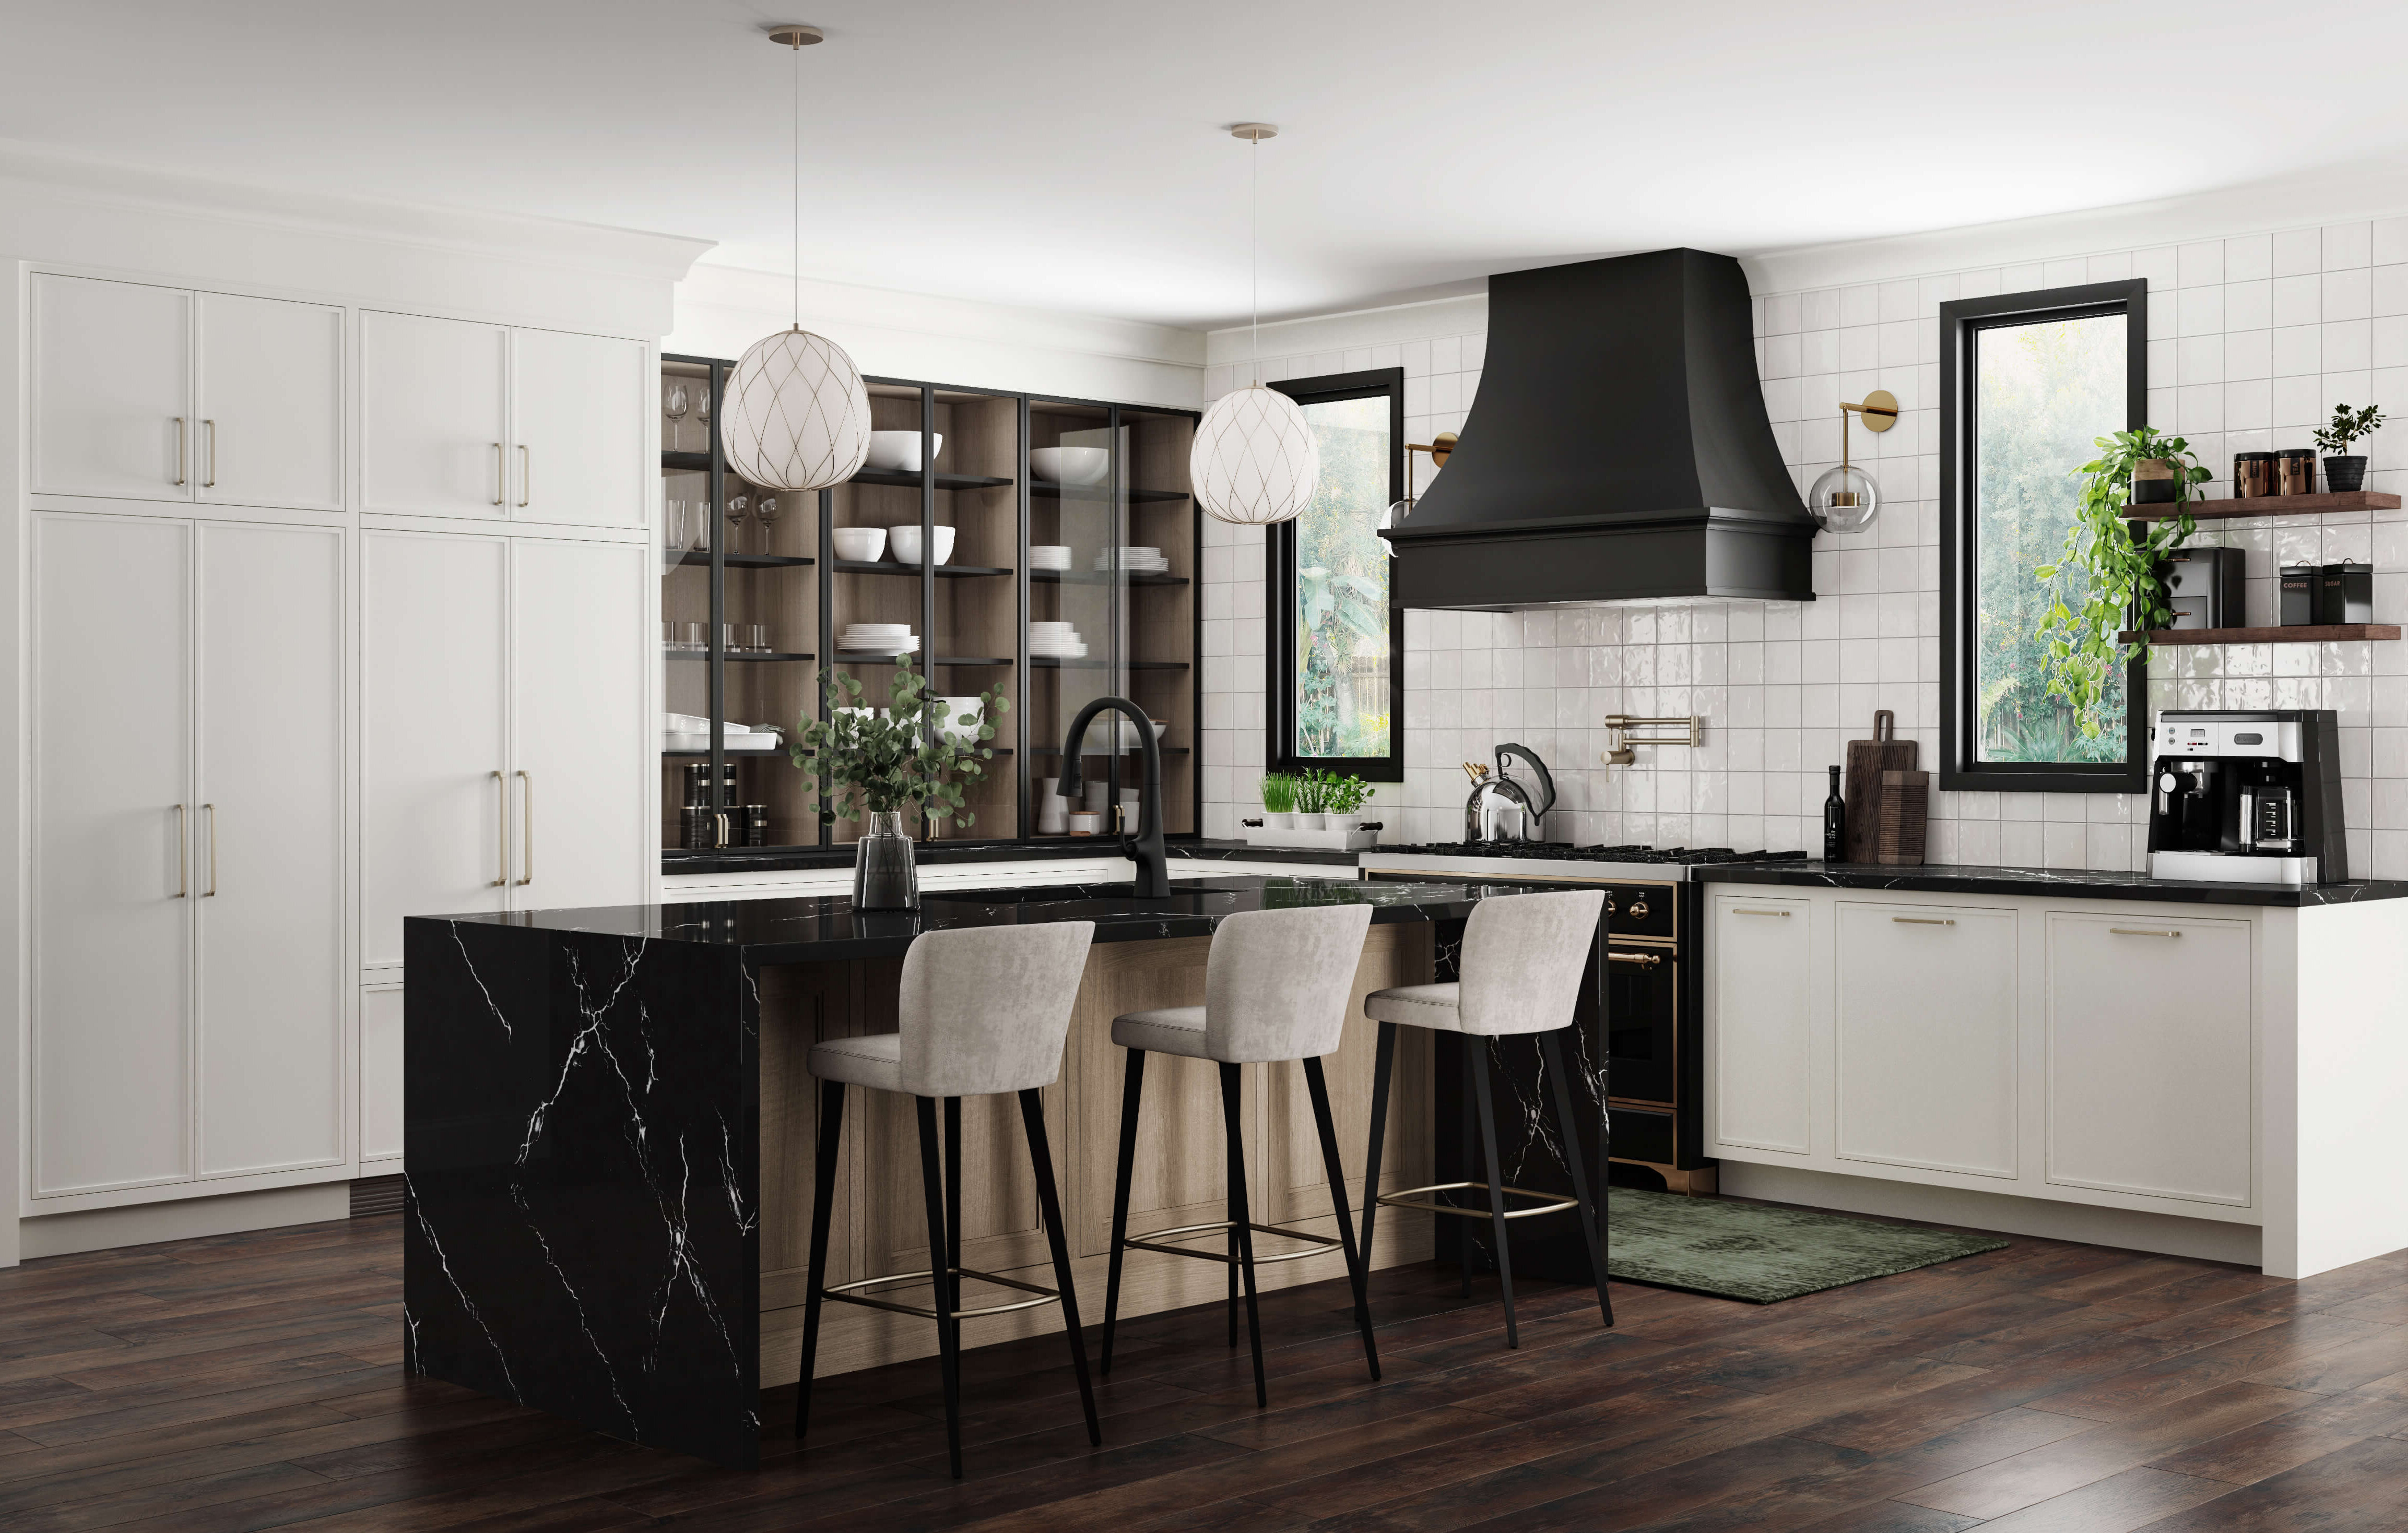 This kitchen design features a skinny shaker door style with thin rails and stiles using inset cabinets. A black painted curved hood creates a beautiful feature above the cooktop.